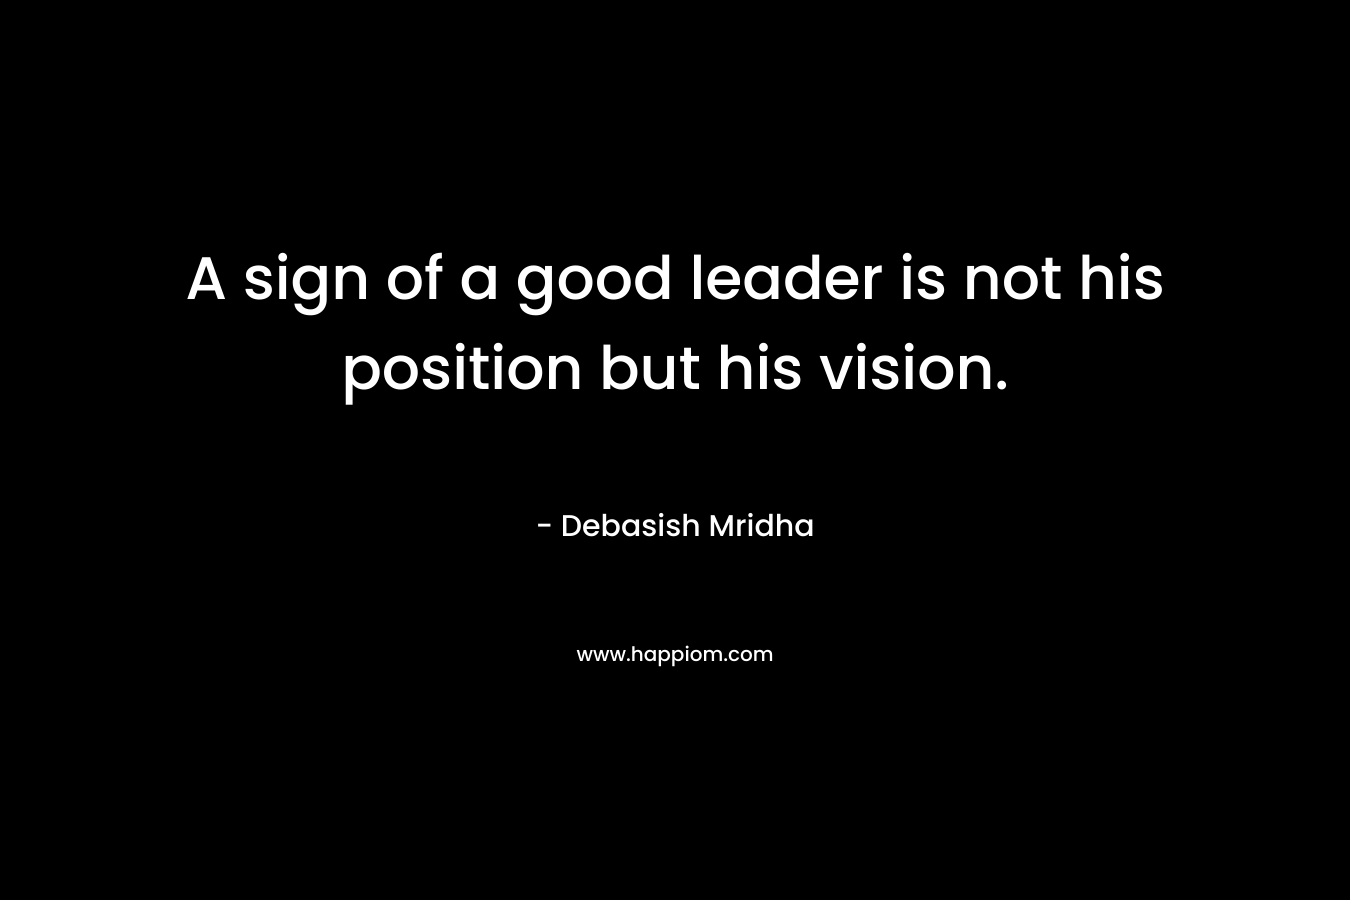 A sign of a good leader is not his position but his vision.